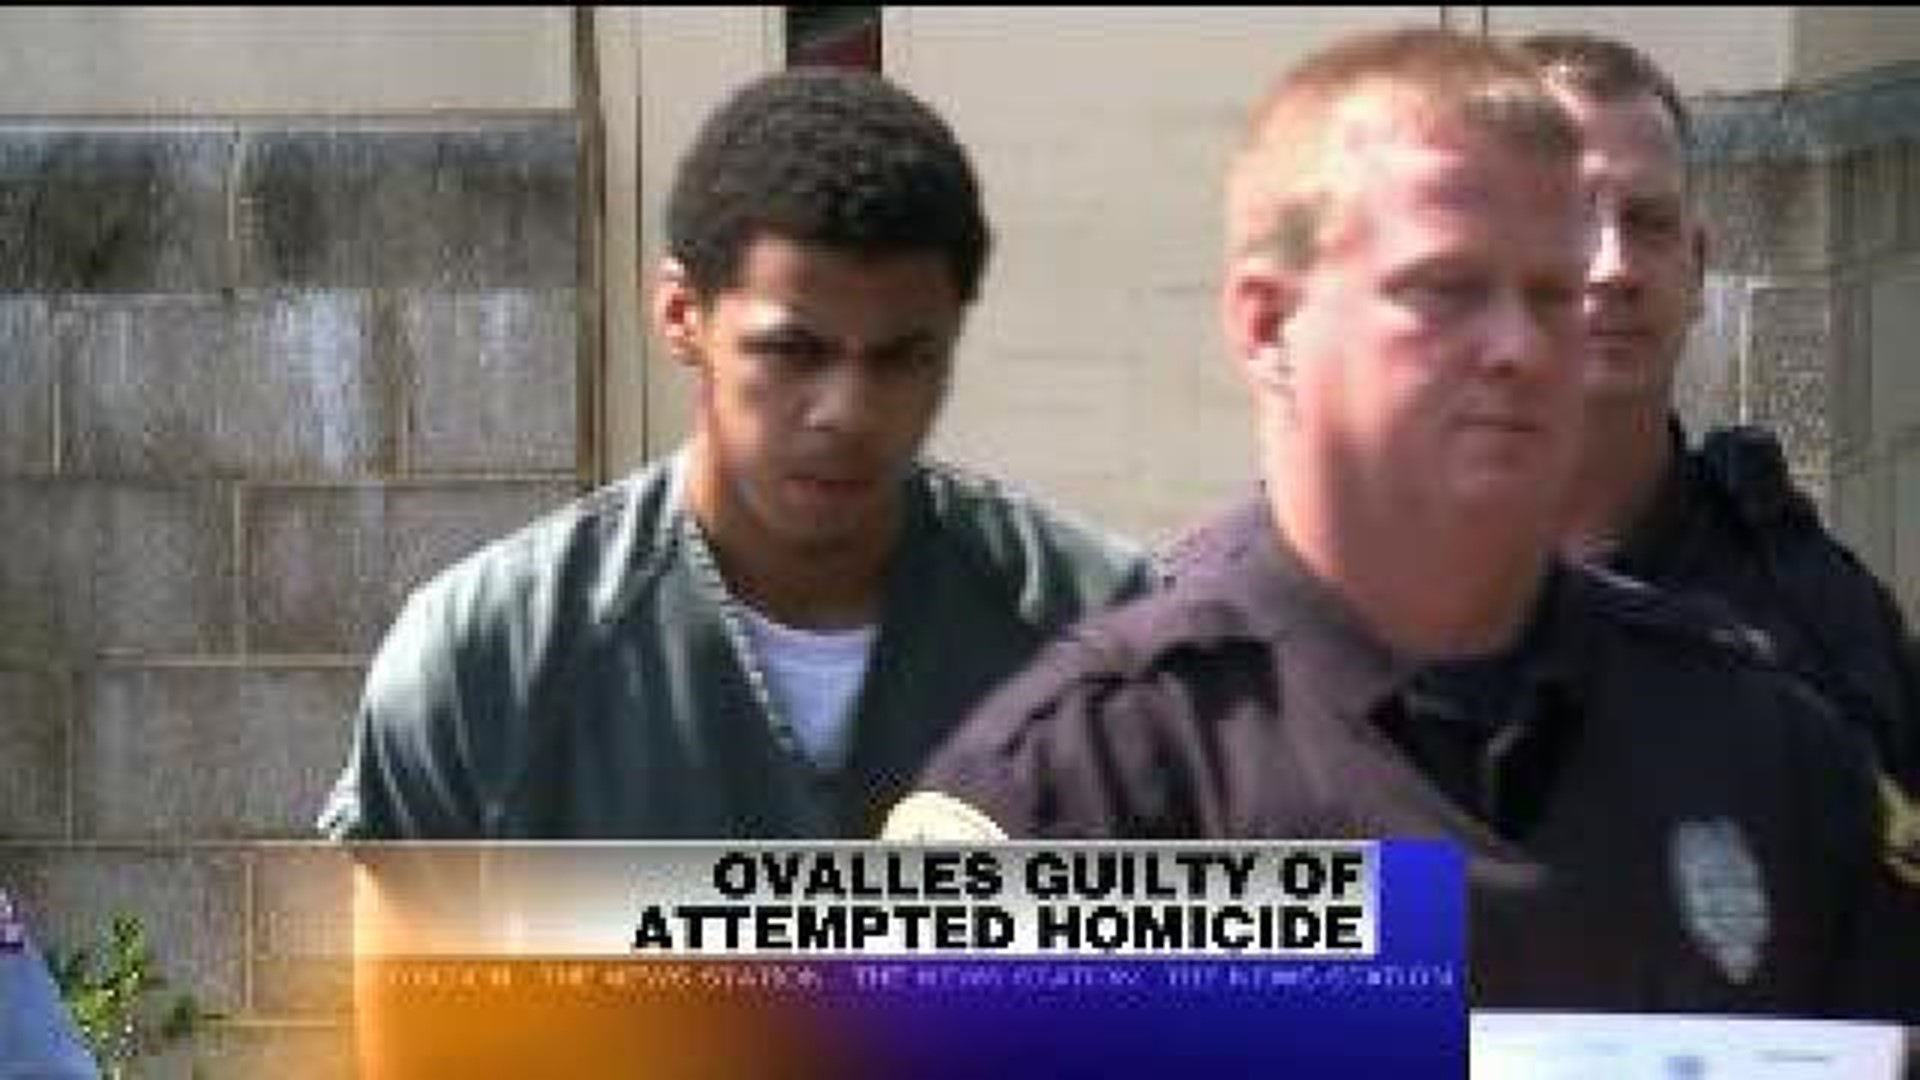 Man Found Guilty of Attempted Homicide